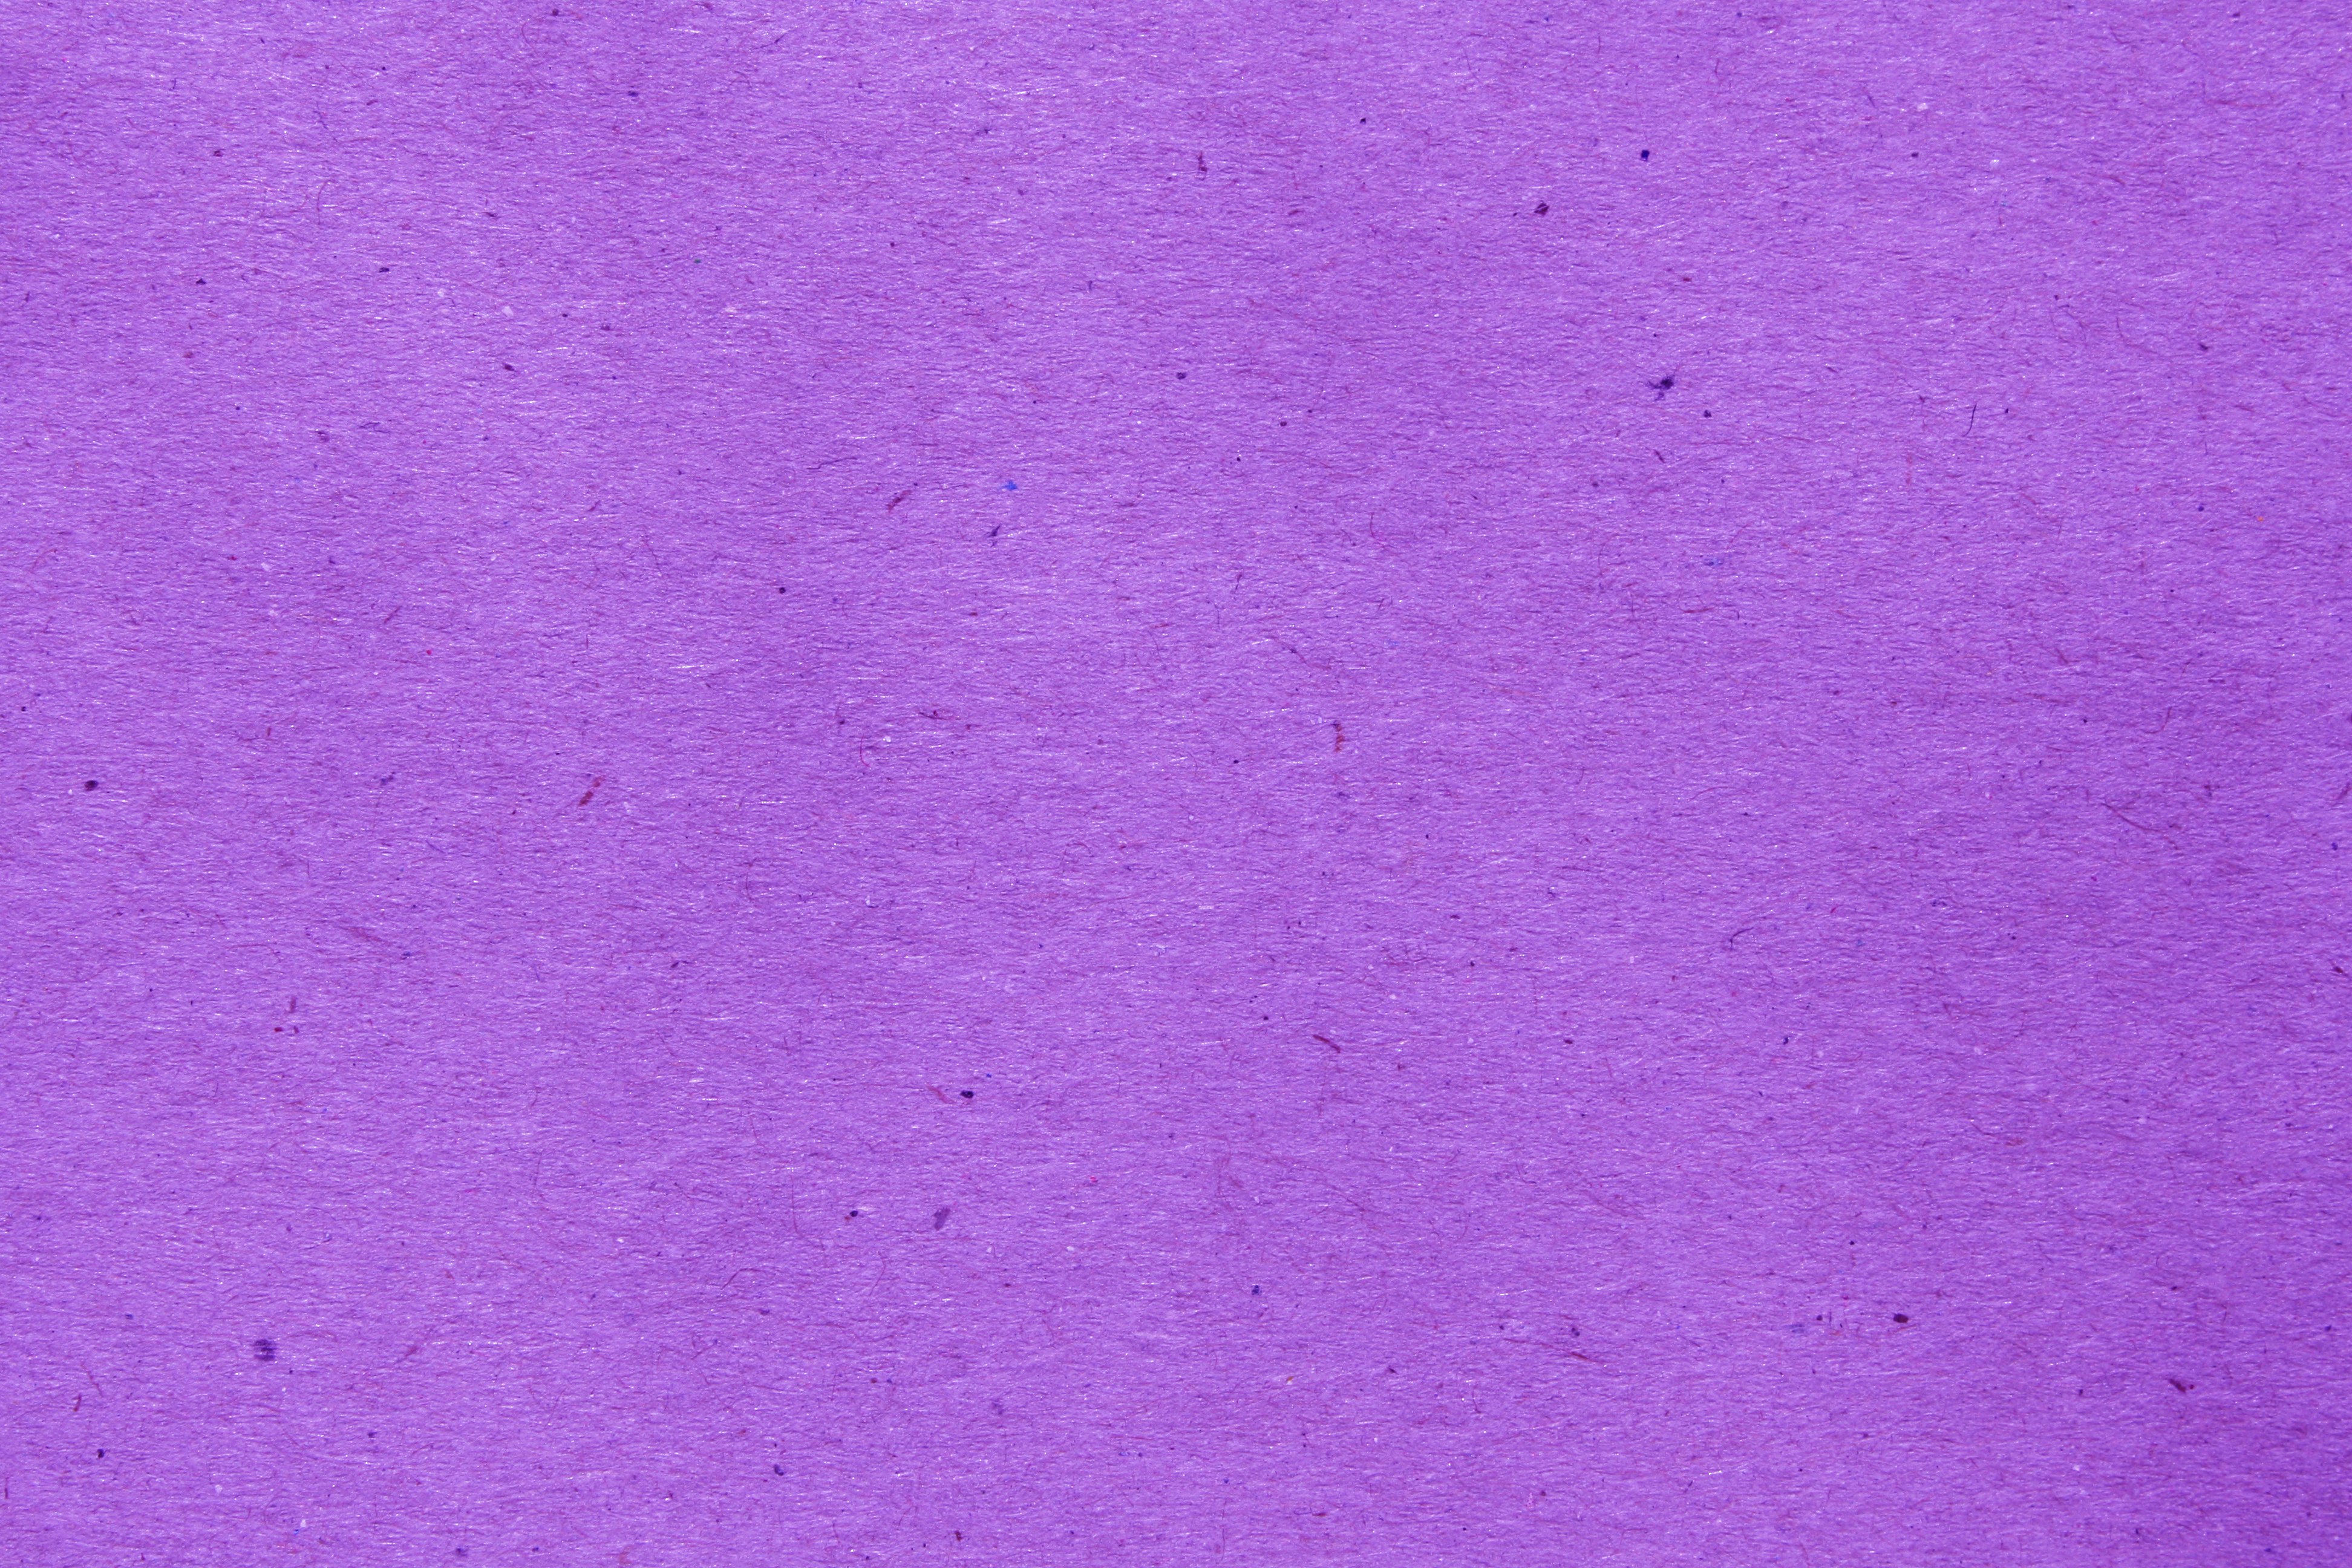 Purple Paper Texture with Flecks Picture, Free Photograph